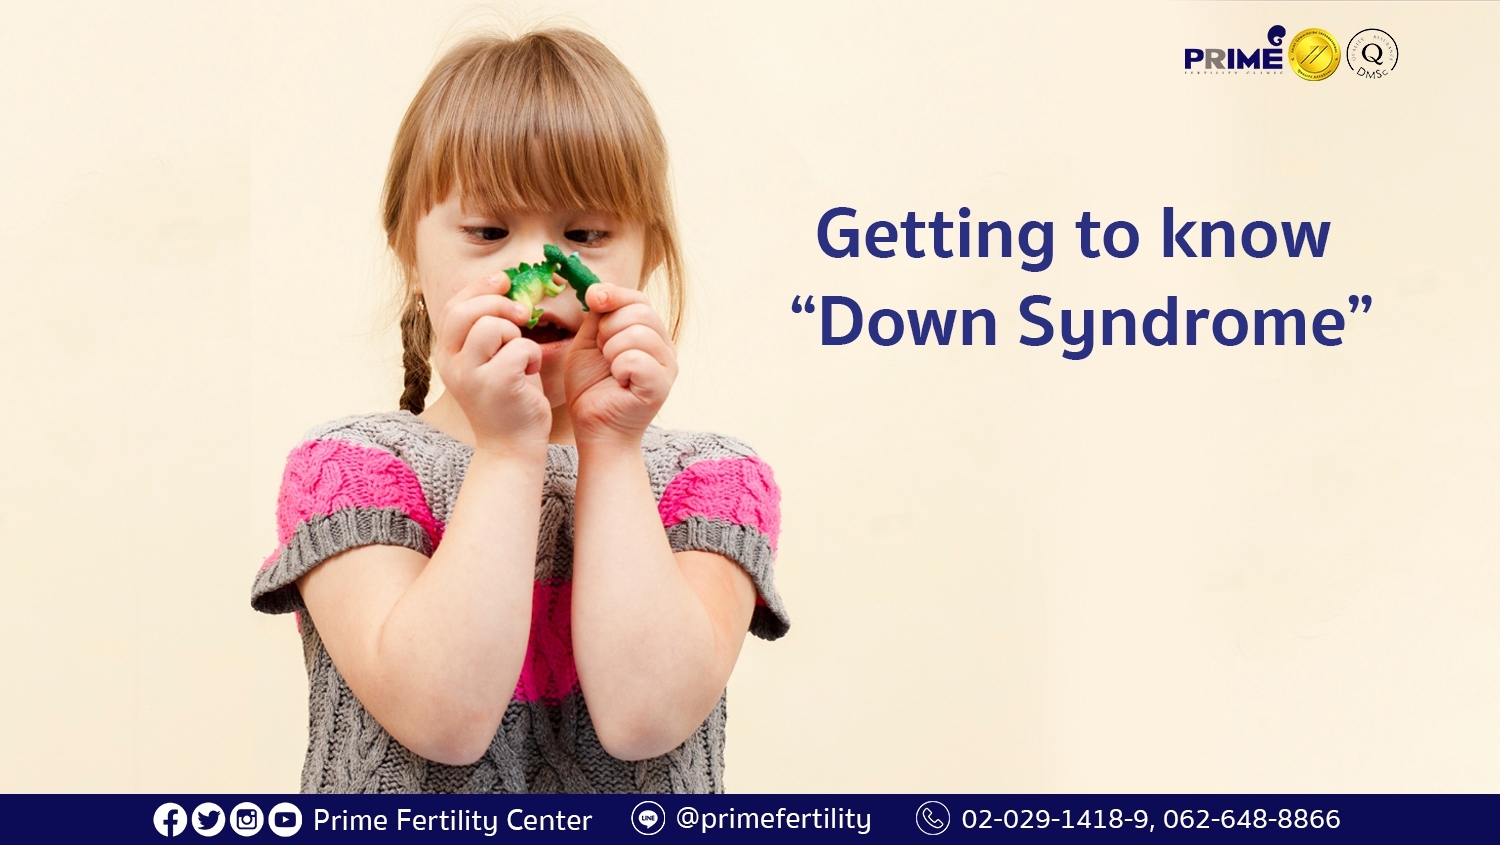 Getting to know “Down Syndrome”